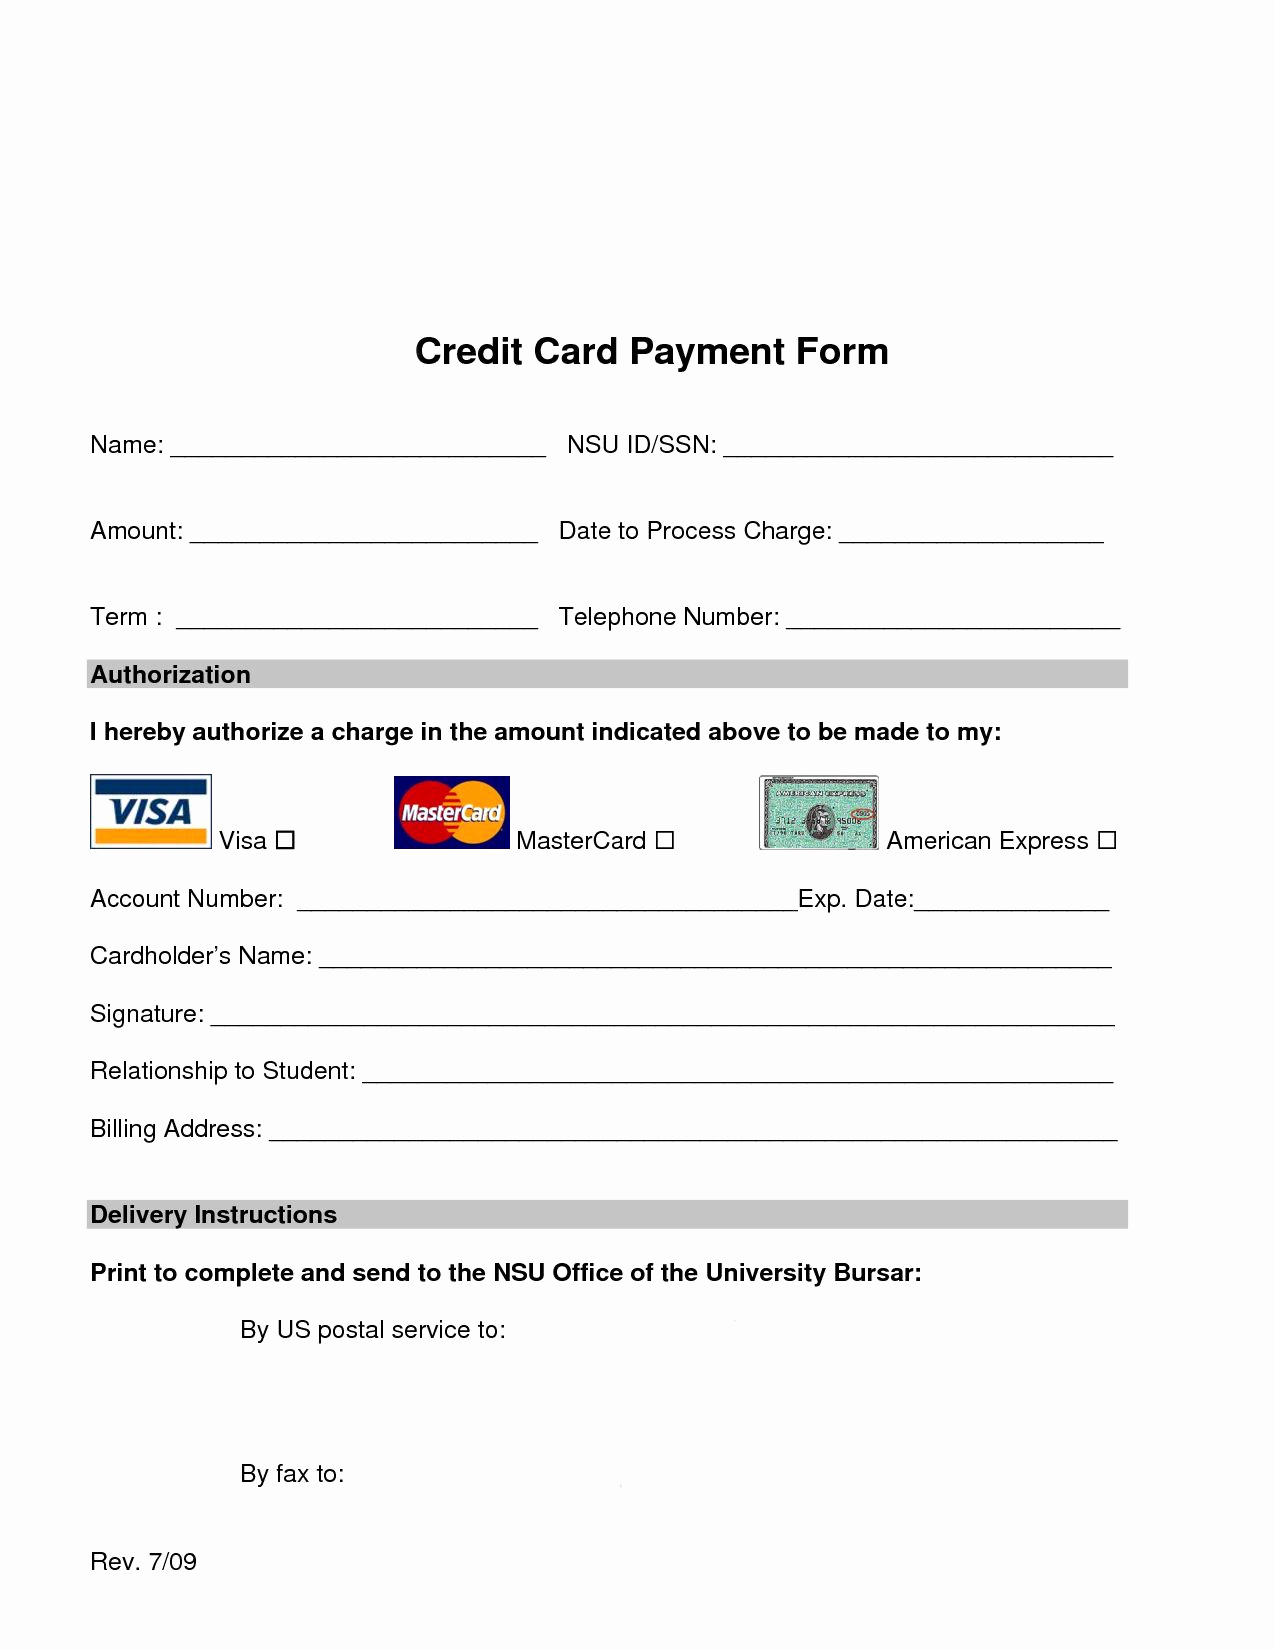 Credit Card form Template Luxury Credit Card Processing form Web Design